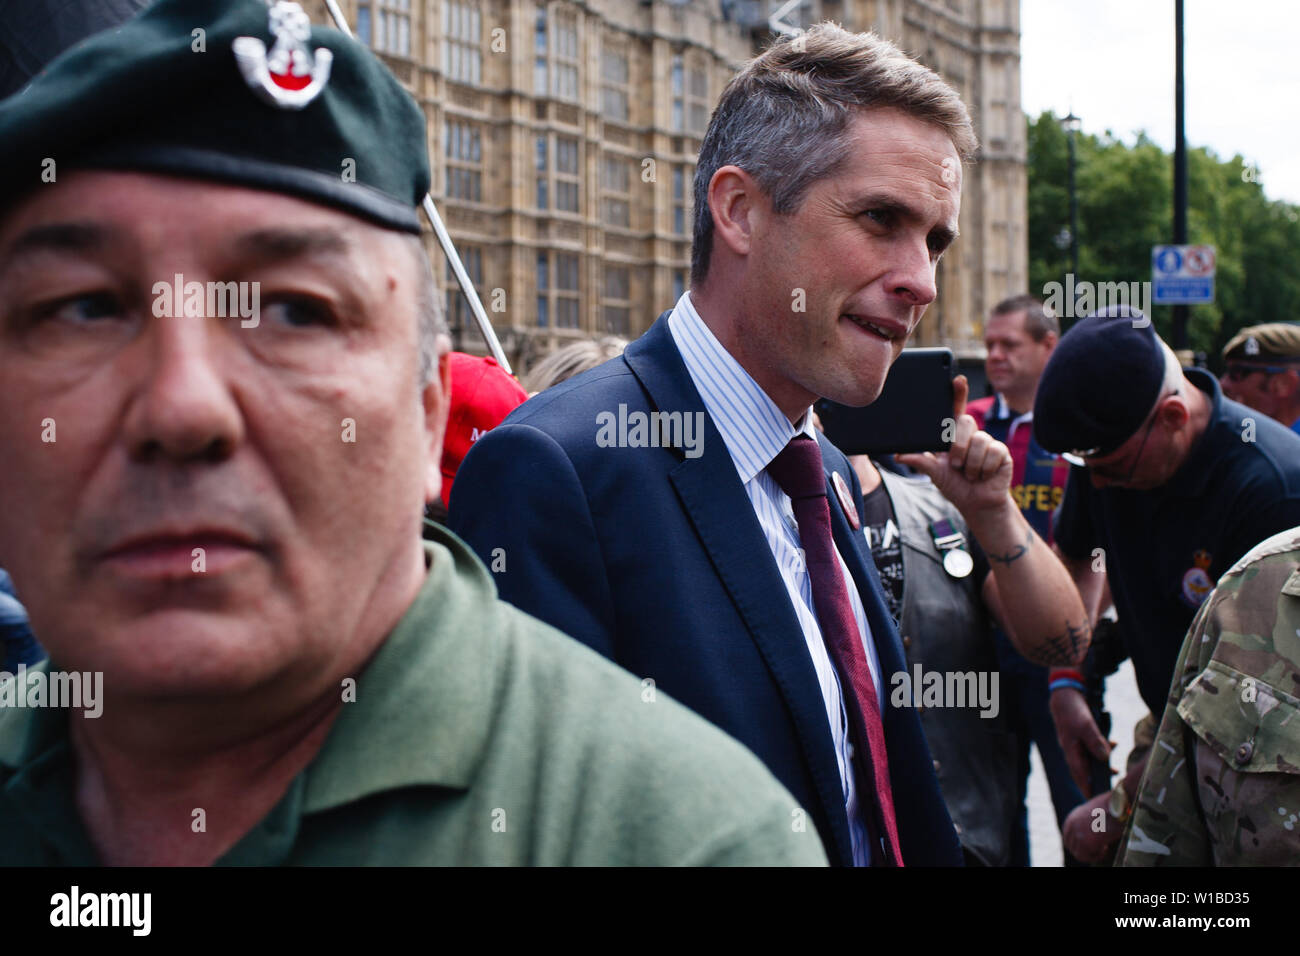 Britain's former Secretary of State for Defence Gavin Williamson speaks with veterans protesting the prosecution of former British soldiers for wartime killings at a demonstration outside the Houses of Parliament. The demonstration centred on the ongoing case of the as-yet-unnamed 'Soldier F', charged with two counts of murder for killings on Bloody Sunday in Londonderry, Northern Ireland, in 1972. Stock Photo